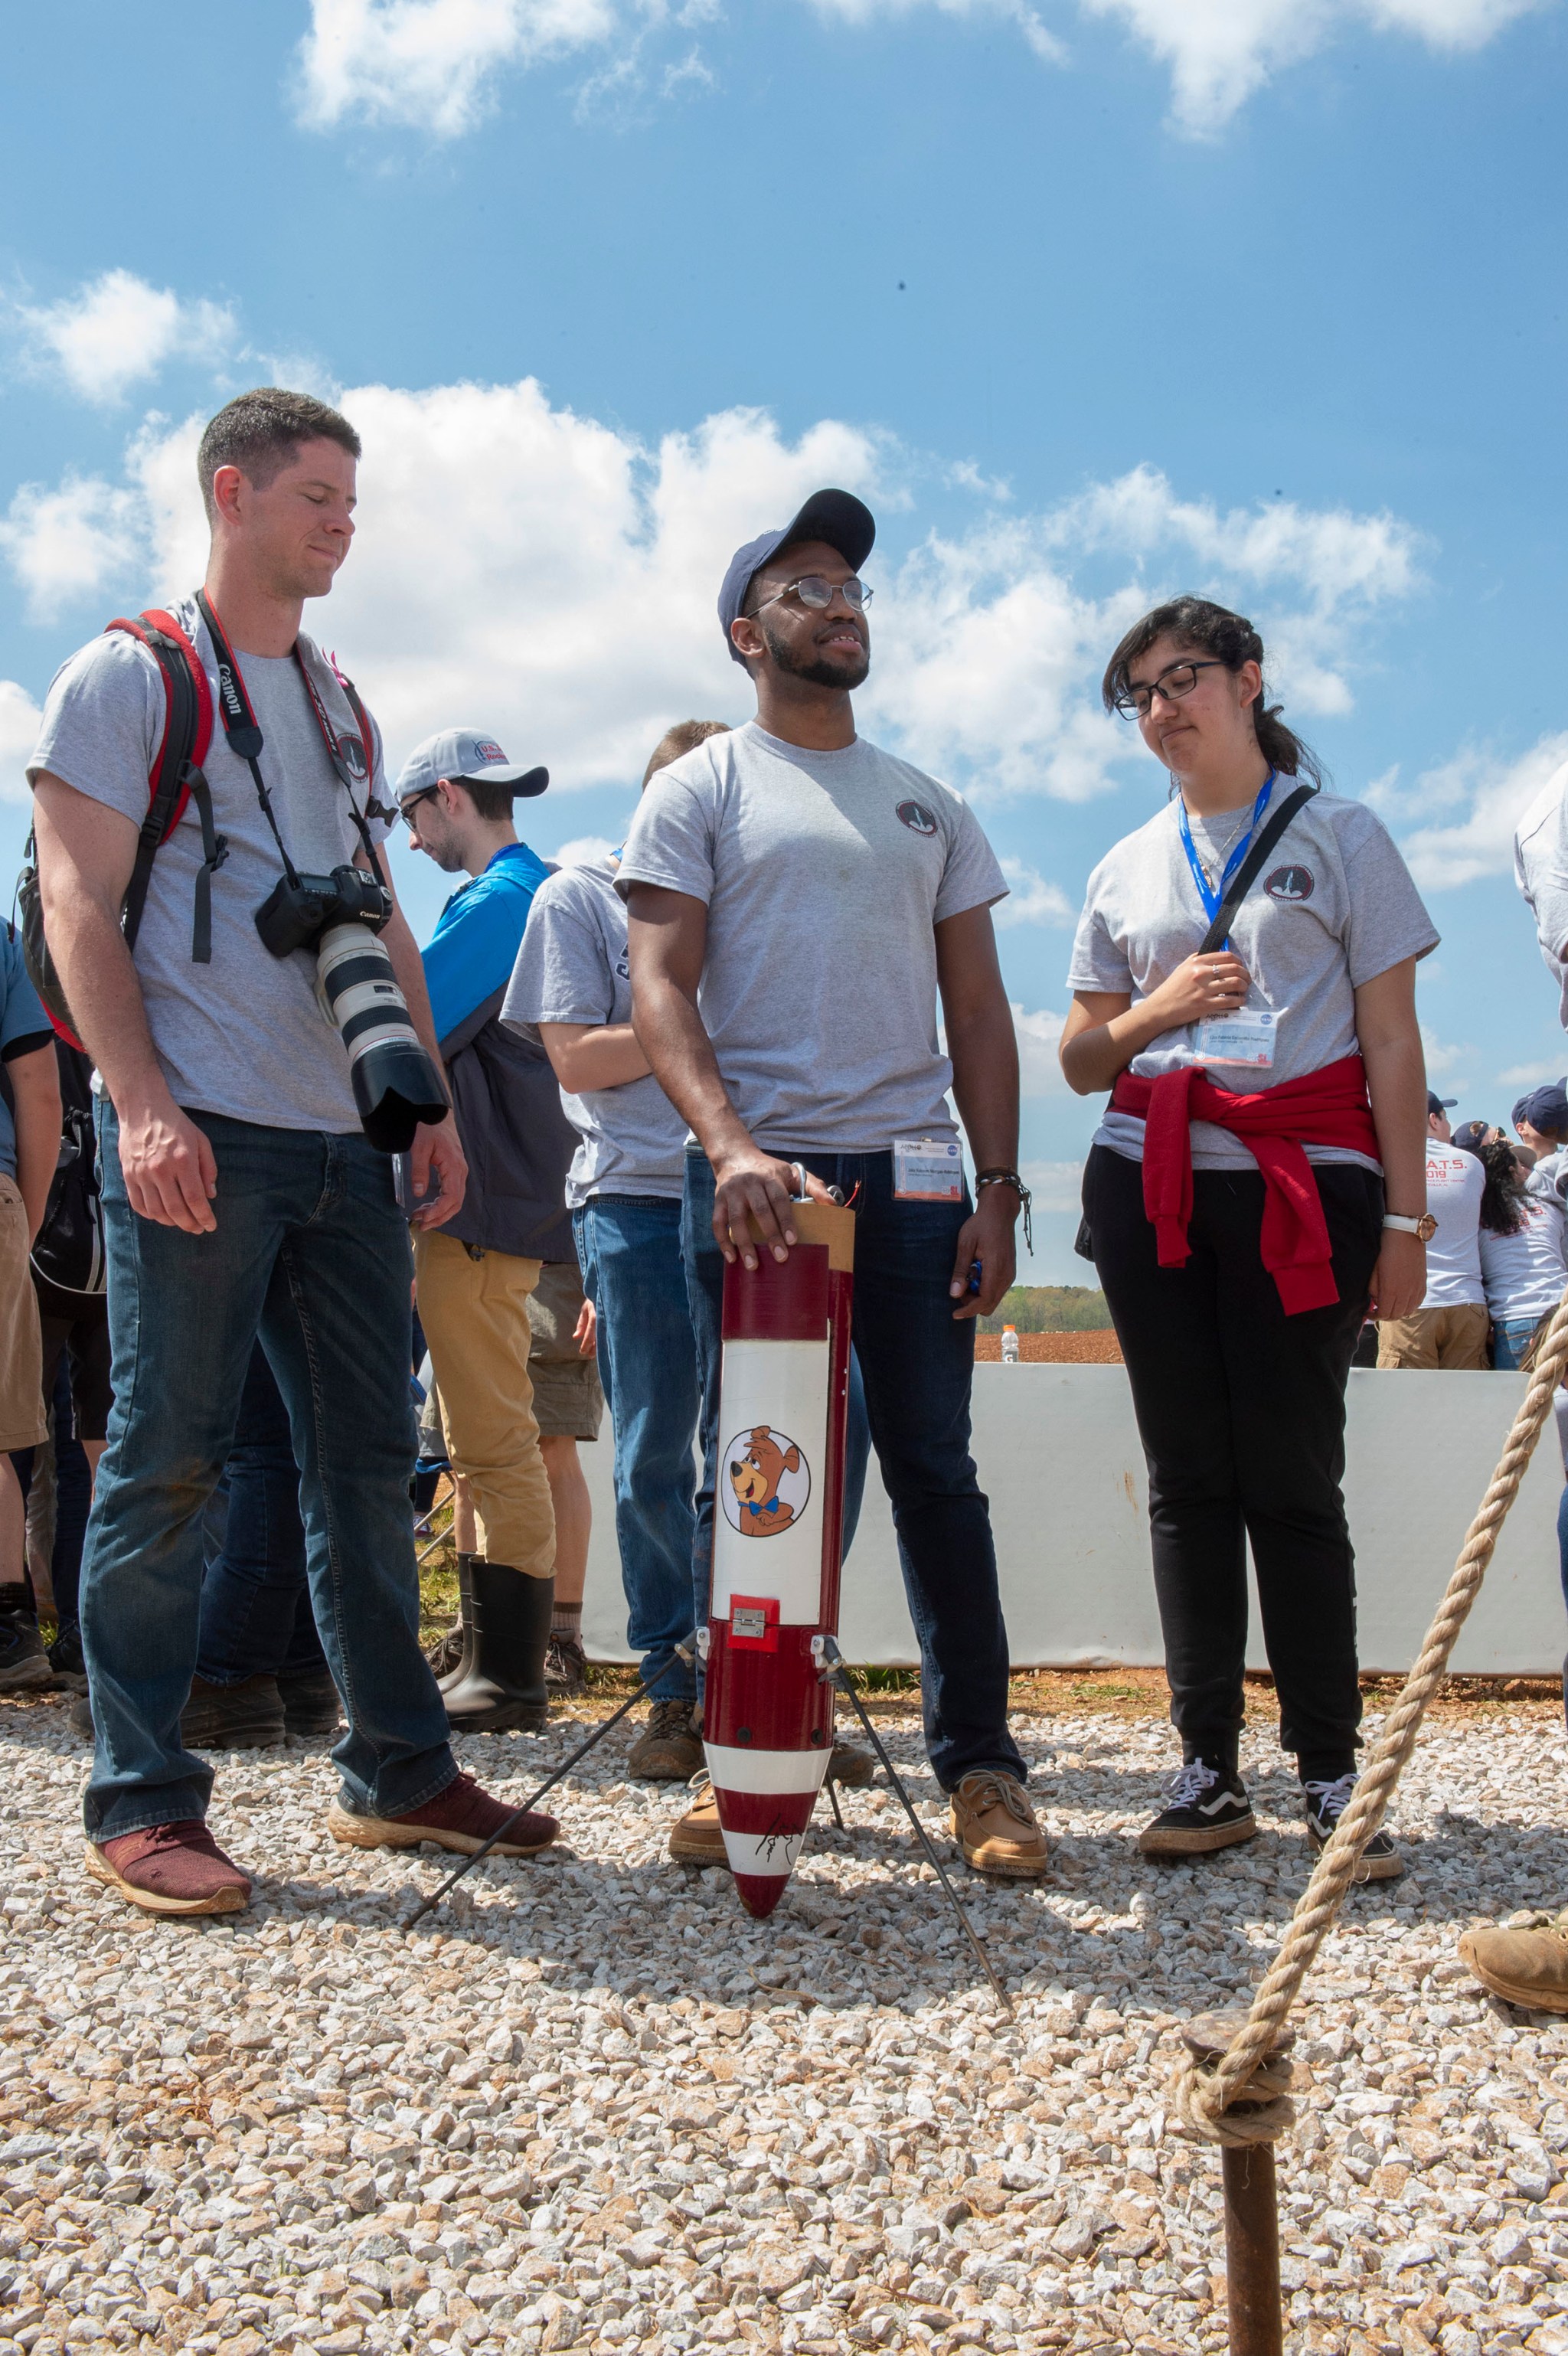 Students standing by model rocket section